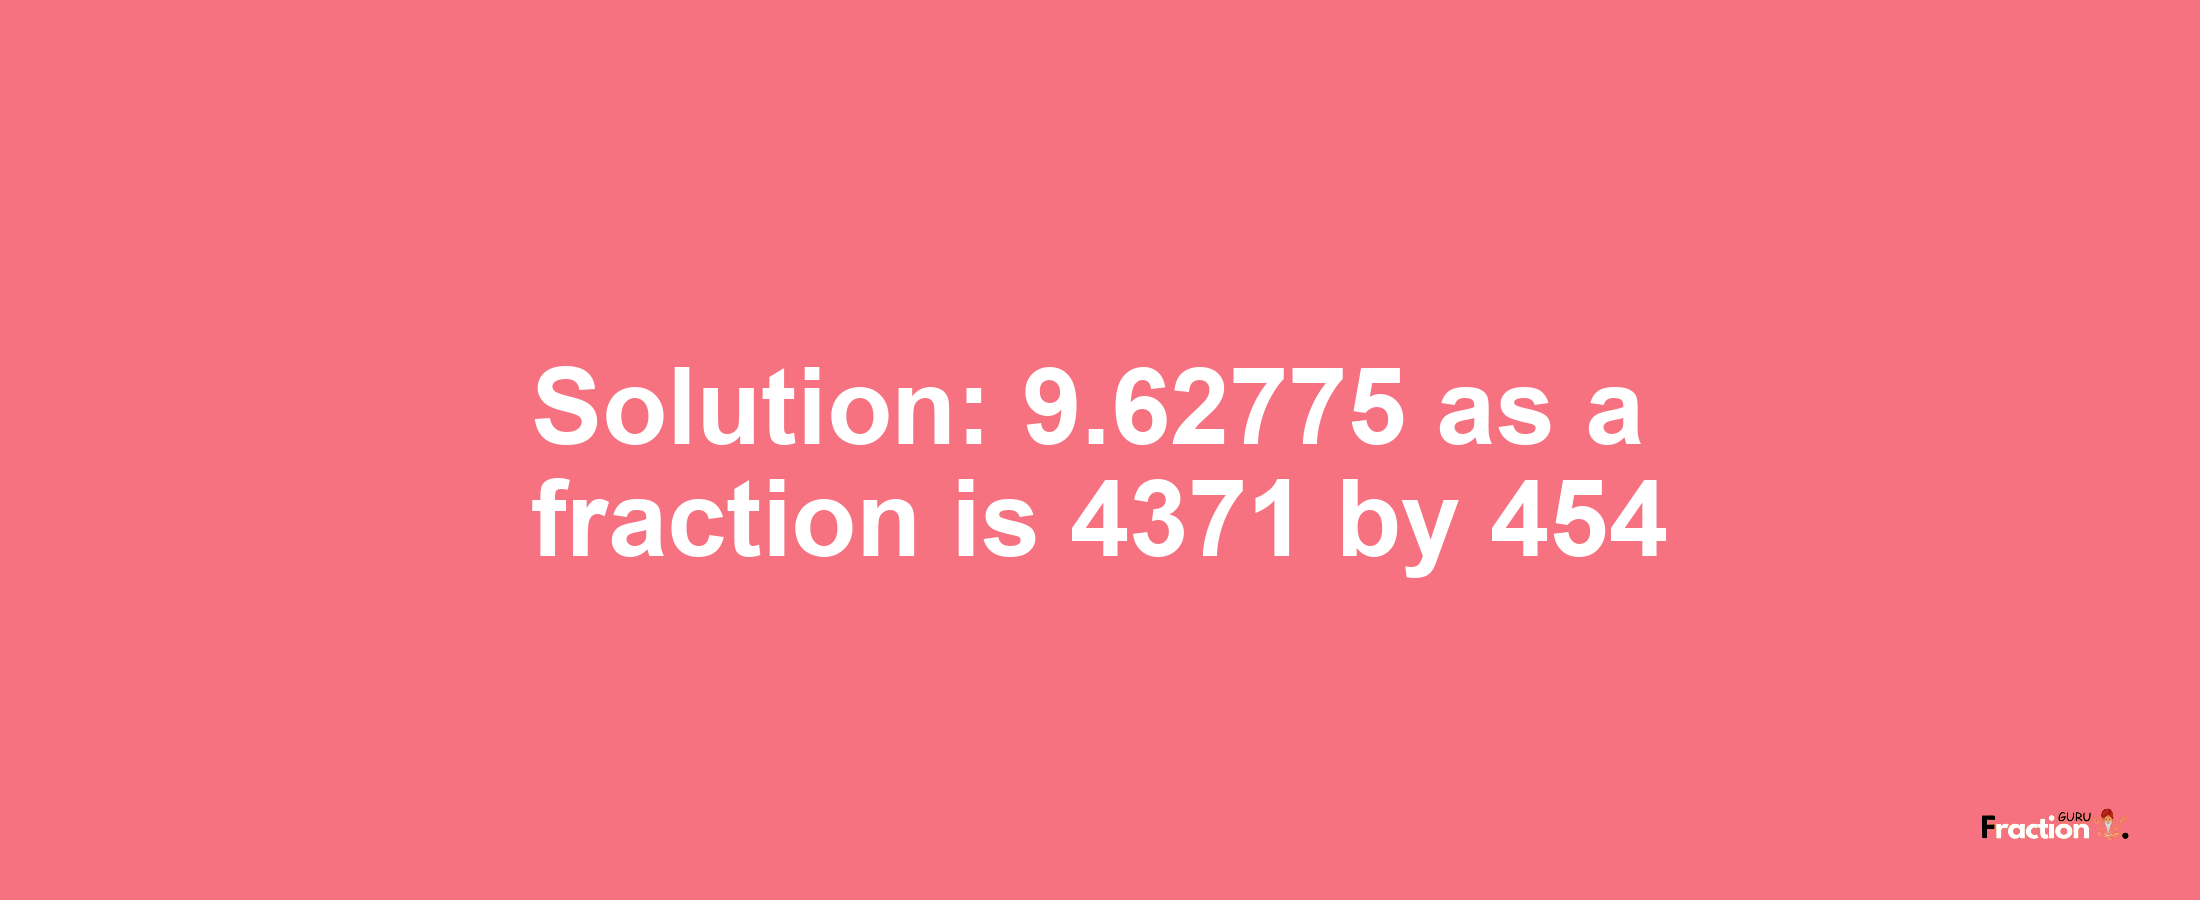 Solution:9.62775 as a fraction is 4371/454